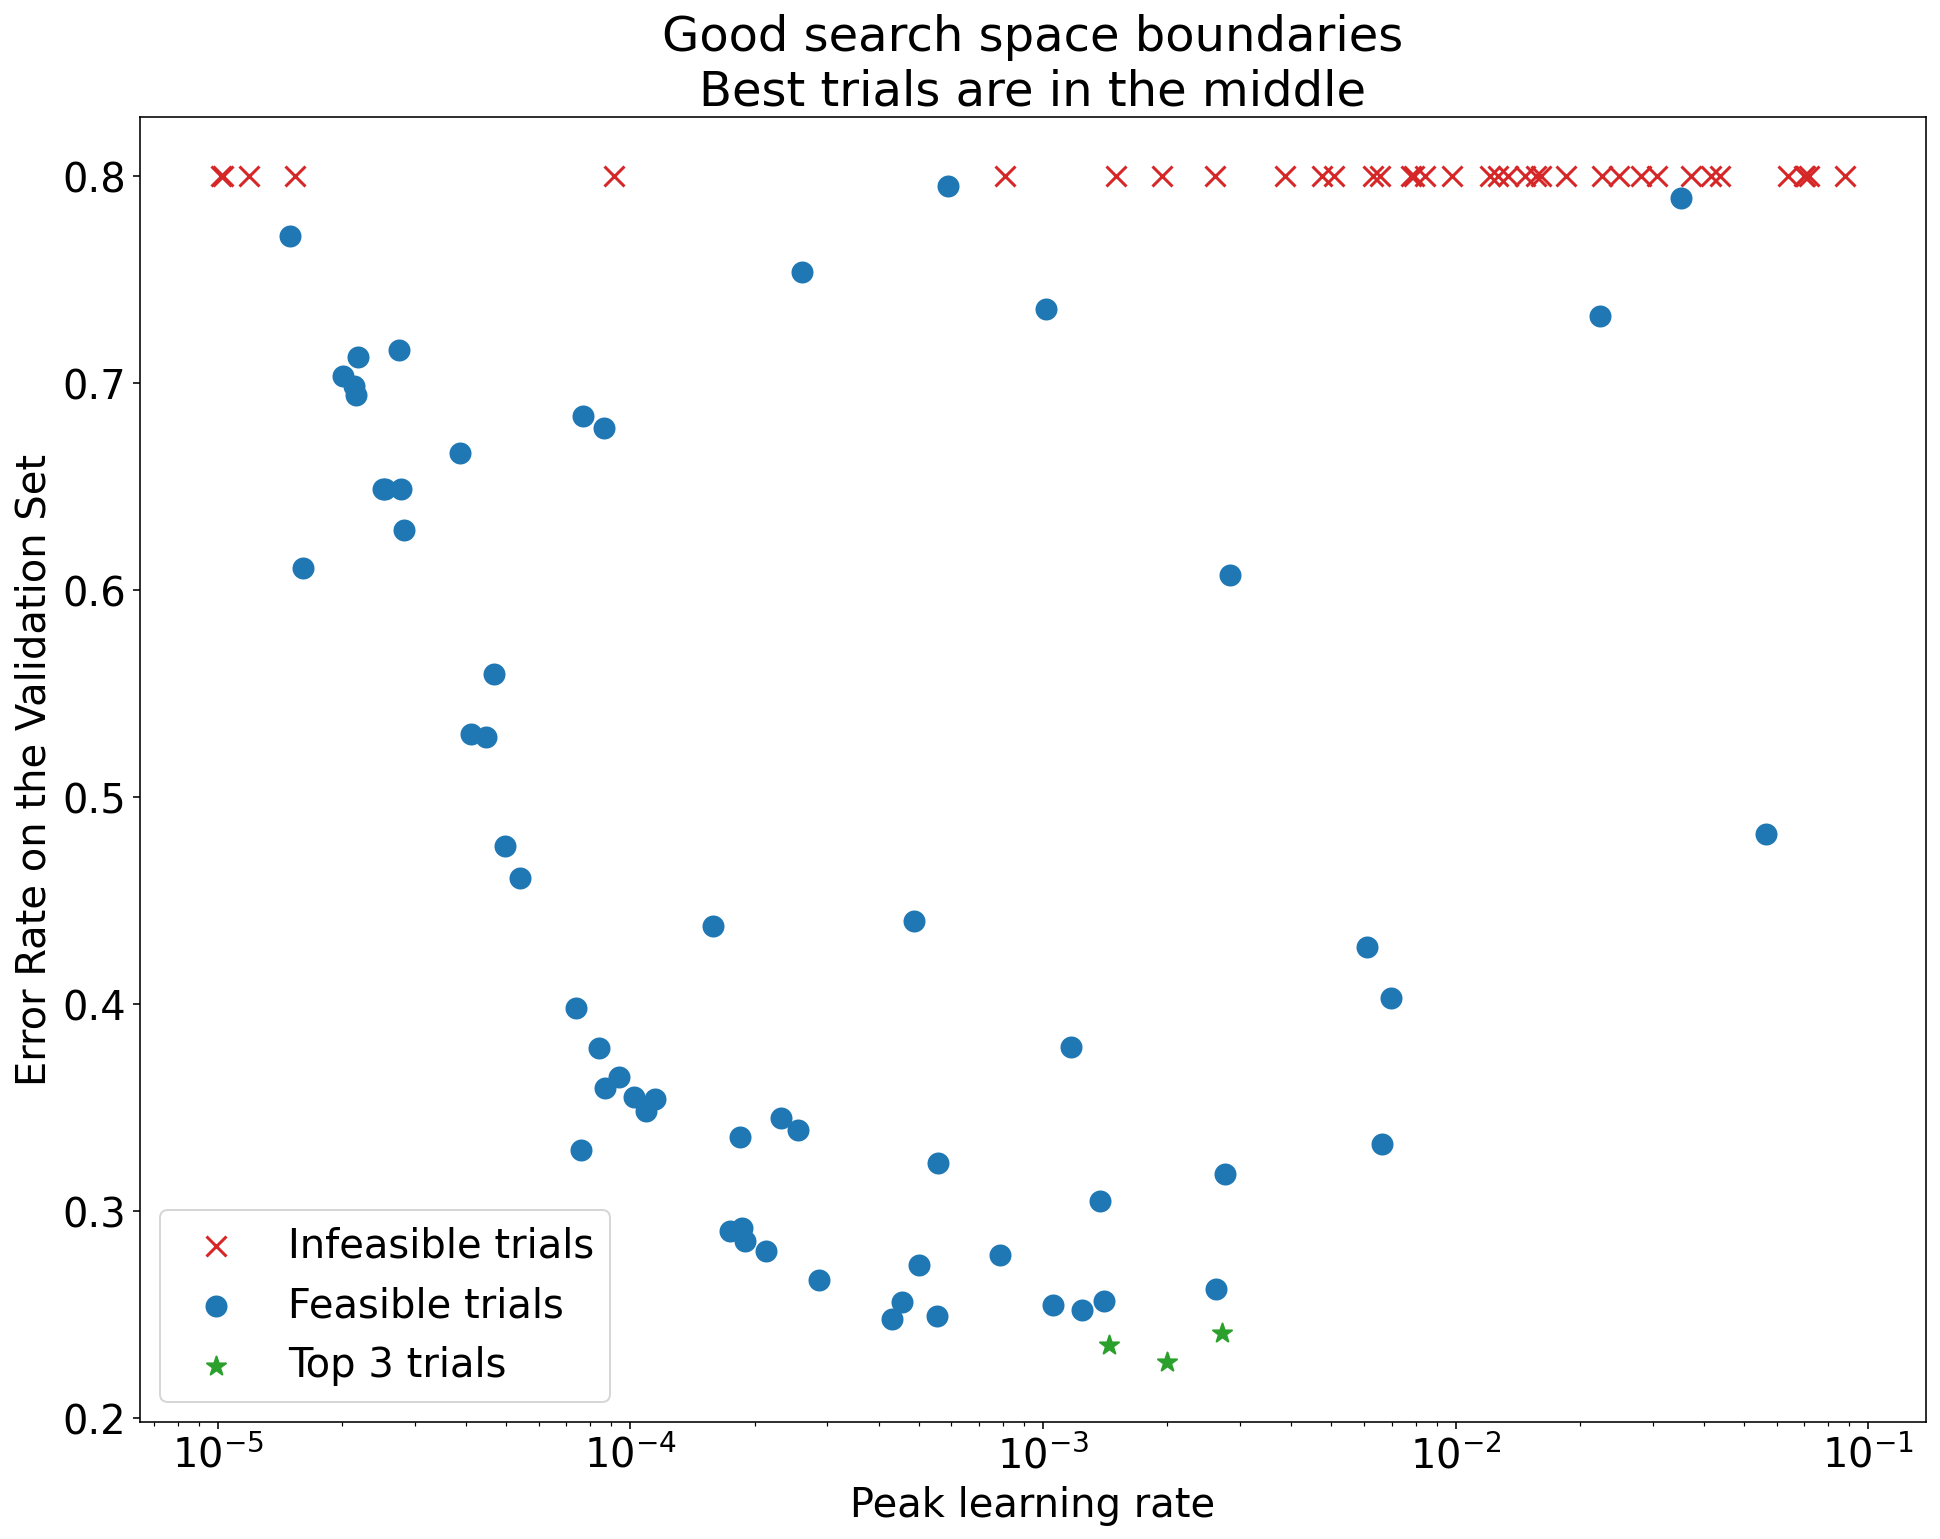 Graph of Error rate on the validation set (y-axis) vs.
          Peak learning rate (x-axis) demonstrating good search
          space boundaries. In this graph, the best trials (lowest
          error rates) are near the middle of the search space, where
          the Peak learning rate is 0.001, not when the Peak learning
          rate is 0.00001 or 0.1.